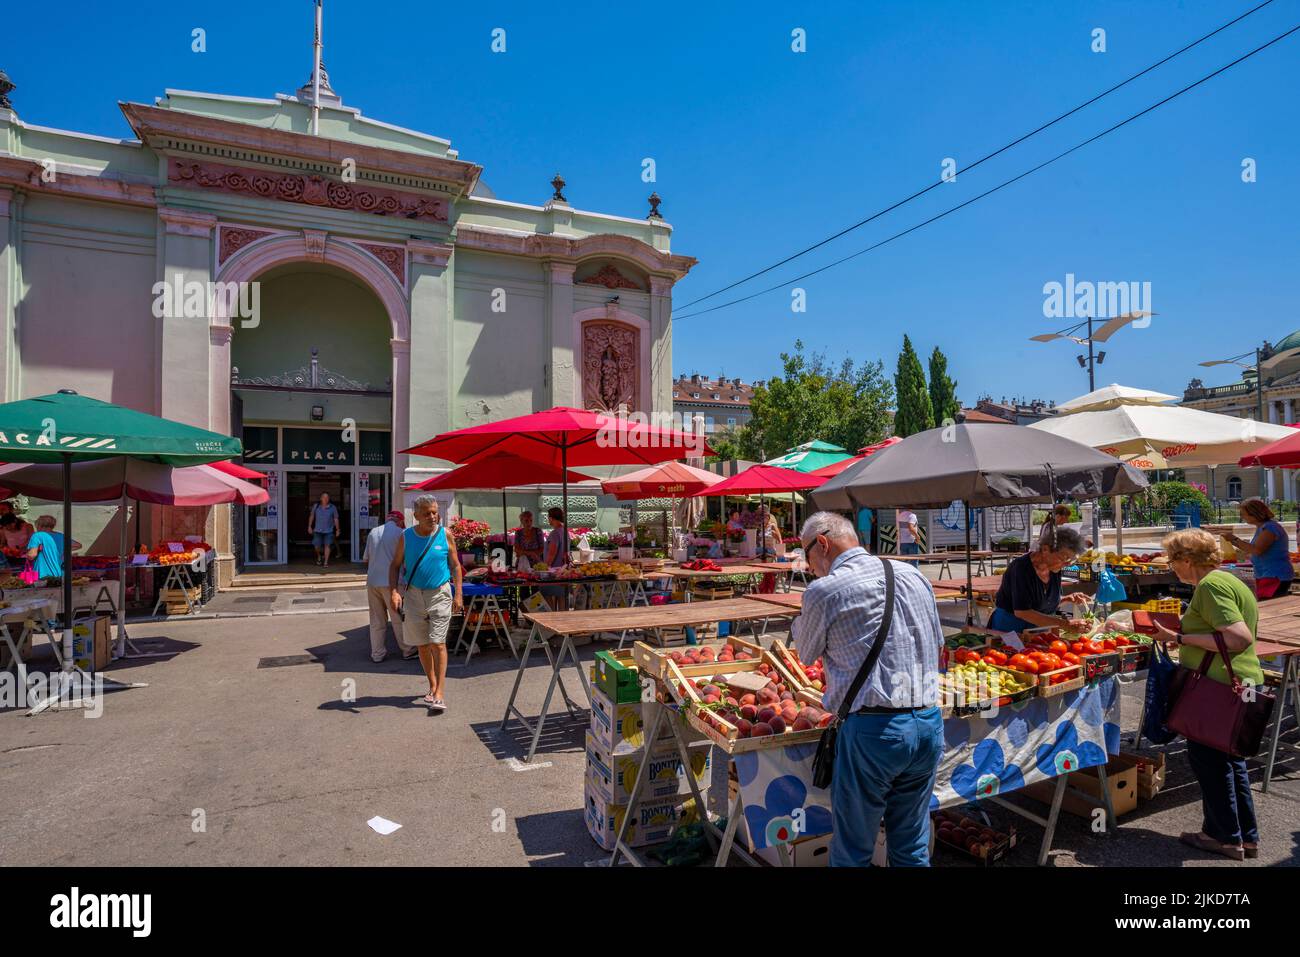 View of fruit and vegetable stall and exterior of ornate Central Market building, Rijeka, Croatia, Europe Stock Photo